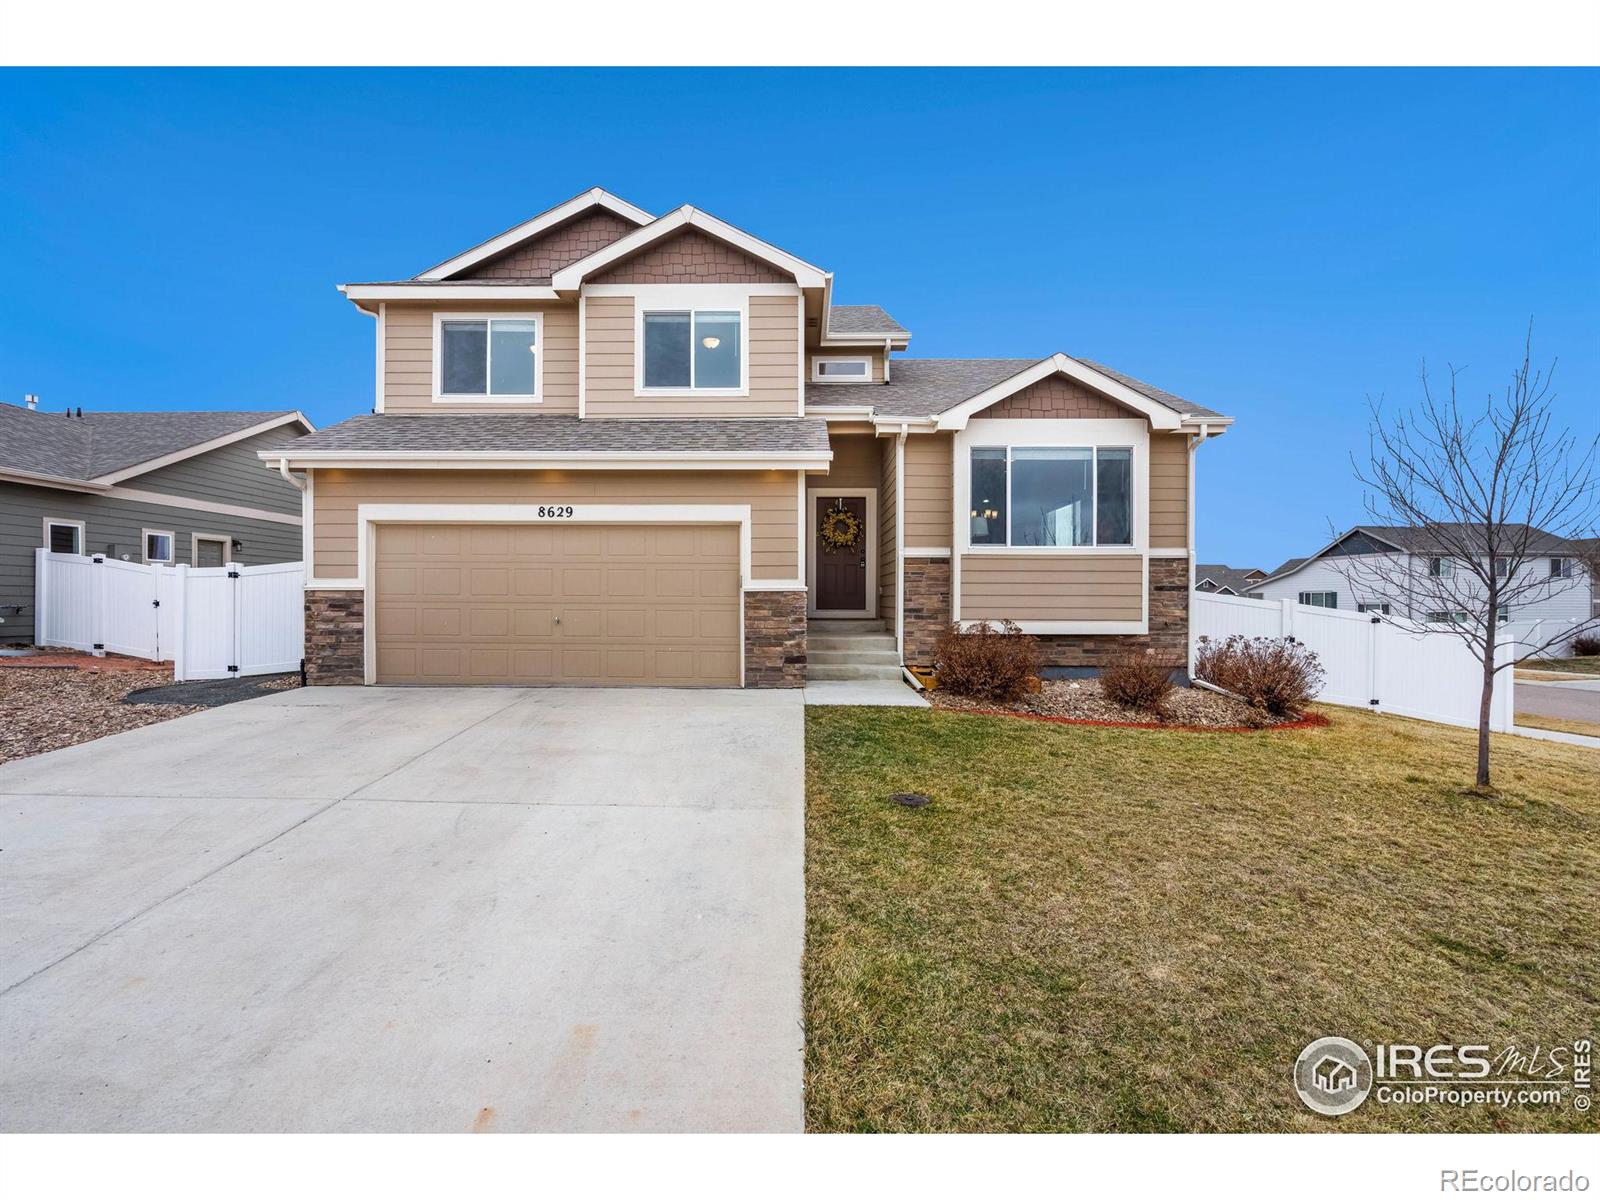 CMA Image for 8629  16th St Rd,Greeley, Colorado